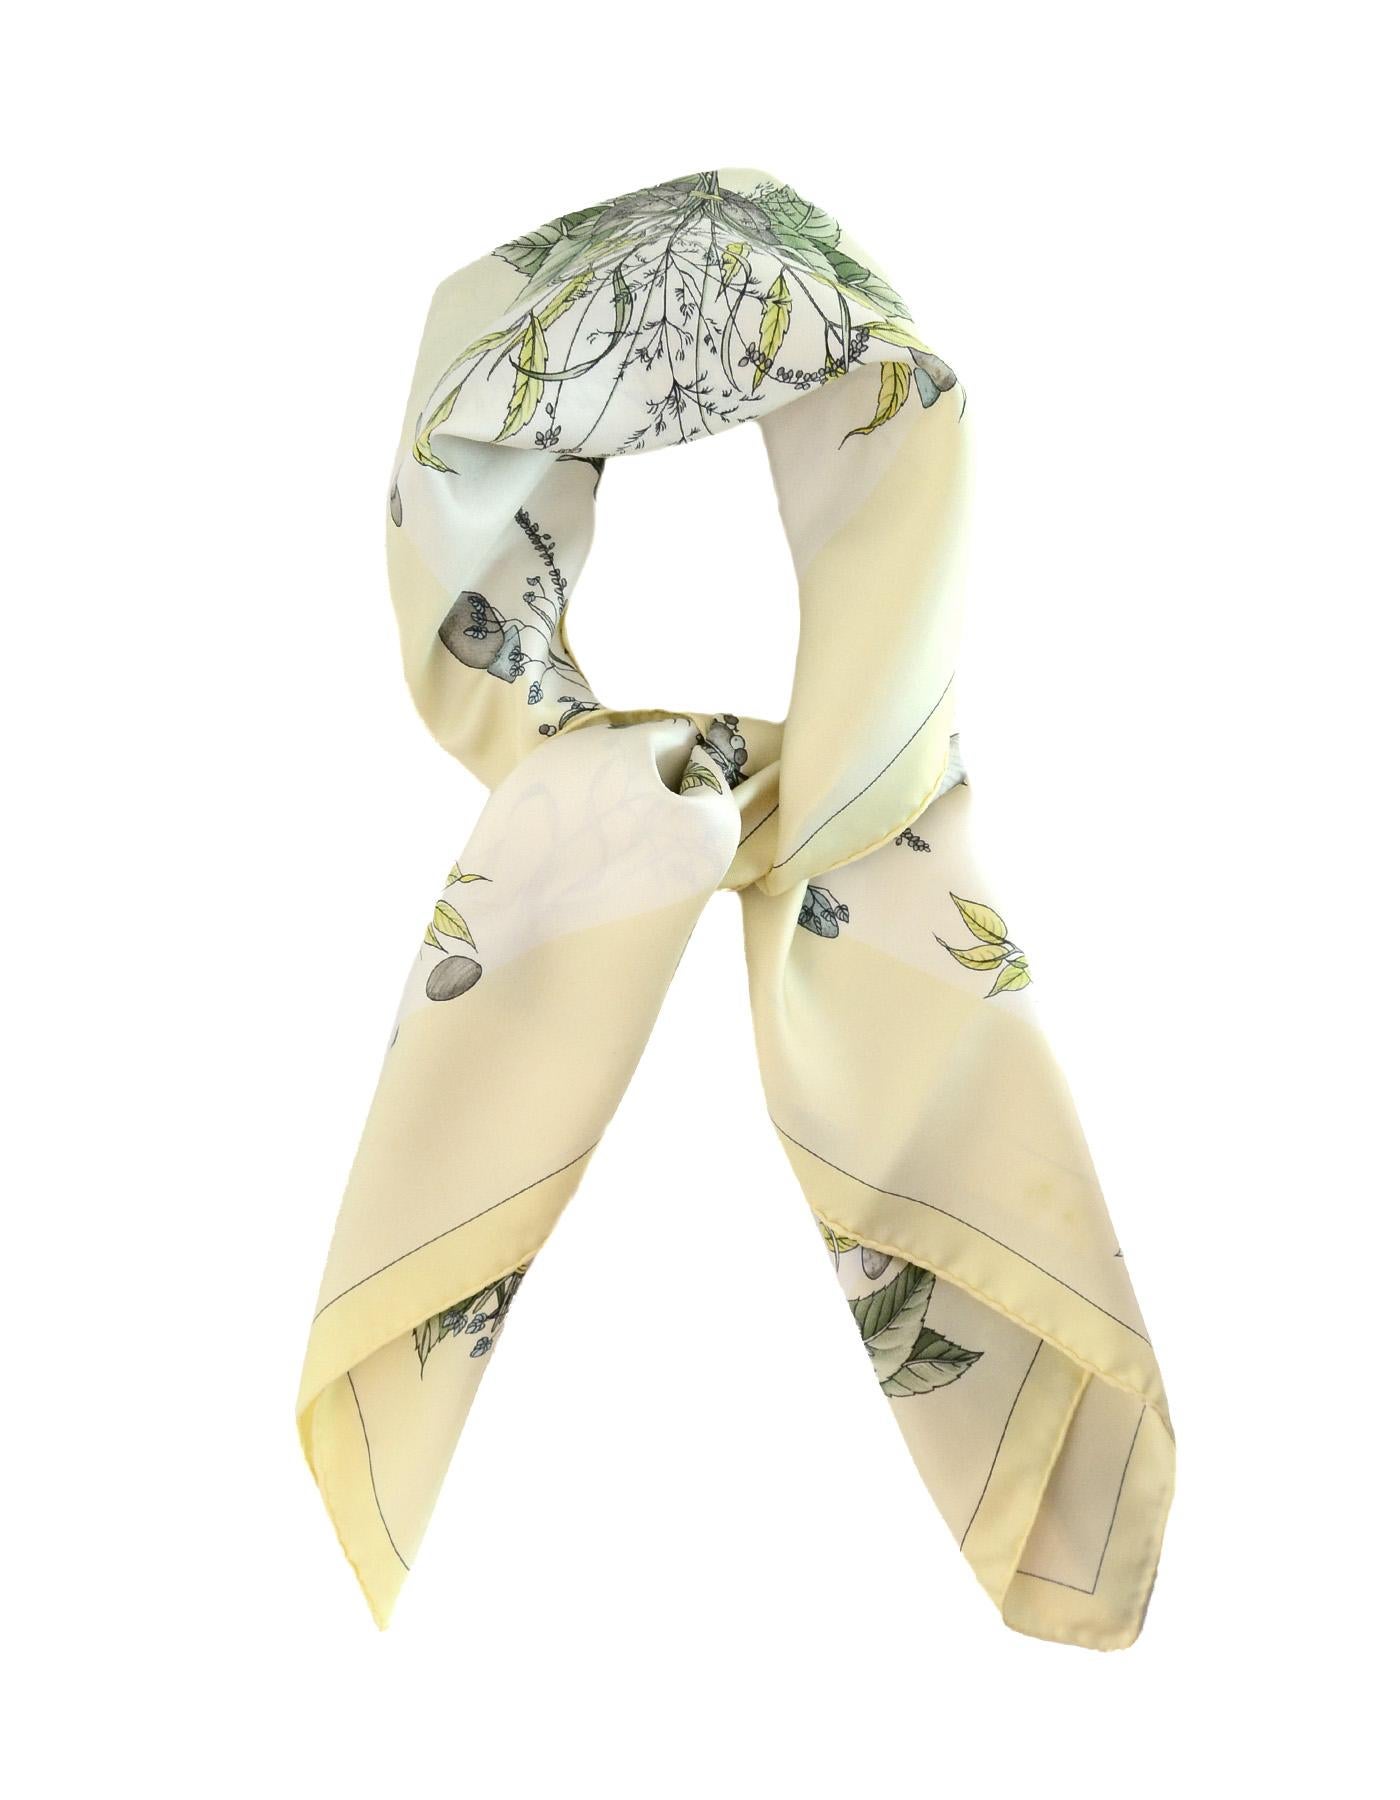 Hermes Yellow Pythagore Floral Printed Silk Scarf 90cm

Made In:  France
Color: Yellow, green, blue print
Materials: 100% silk
Overall Condition: Very good pre-owned condition with exception of light staining

Measurements: 
35